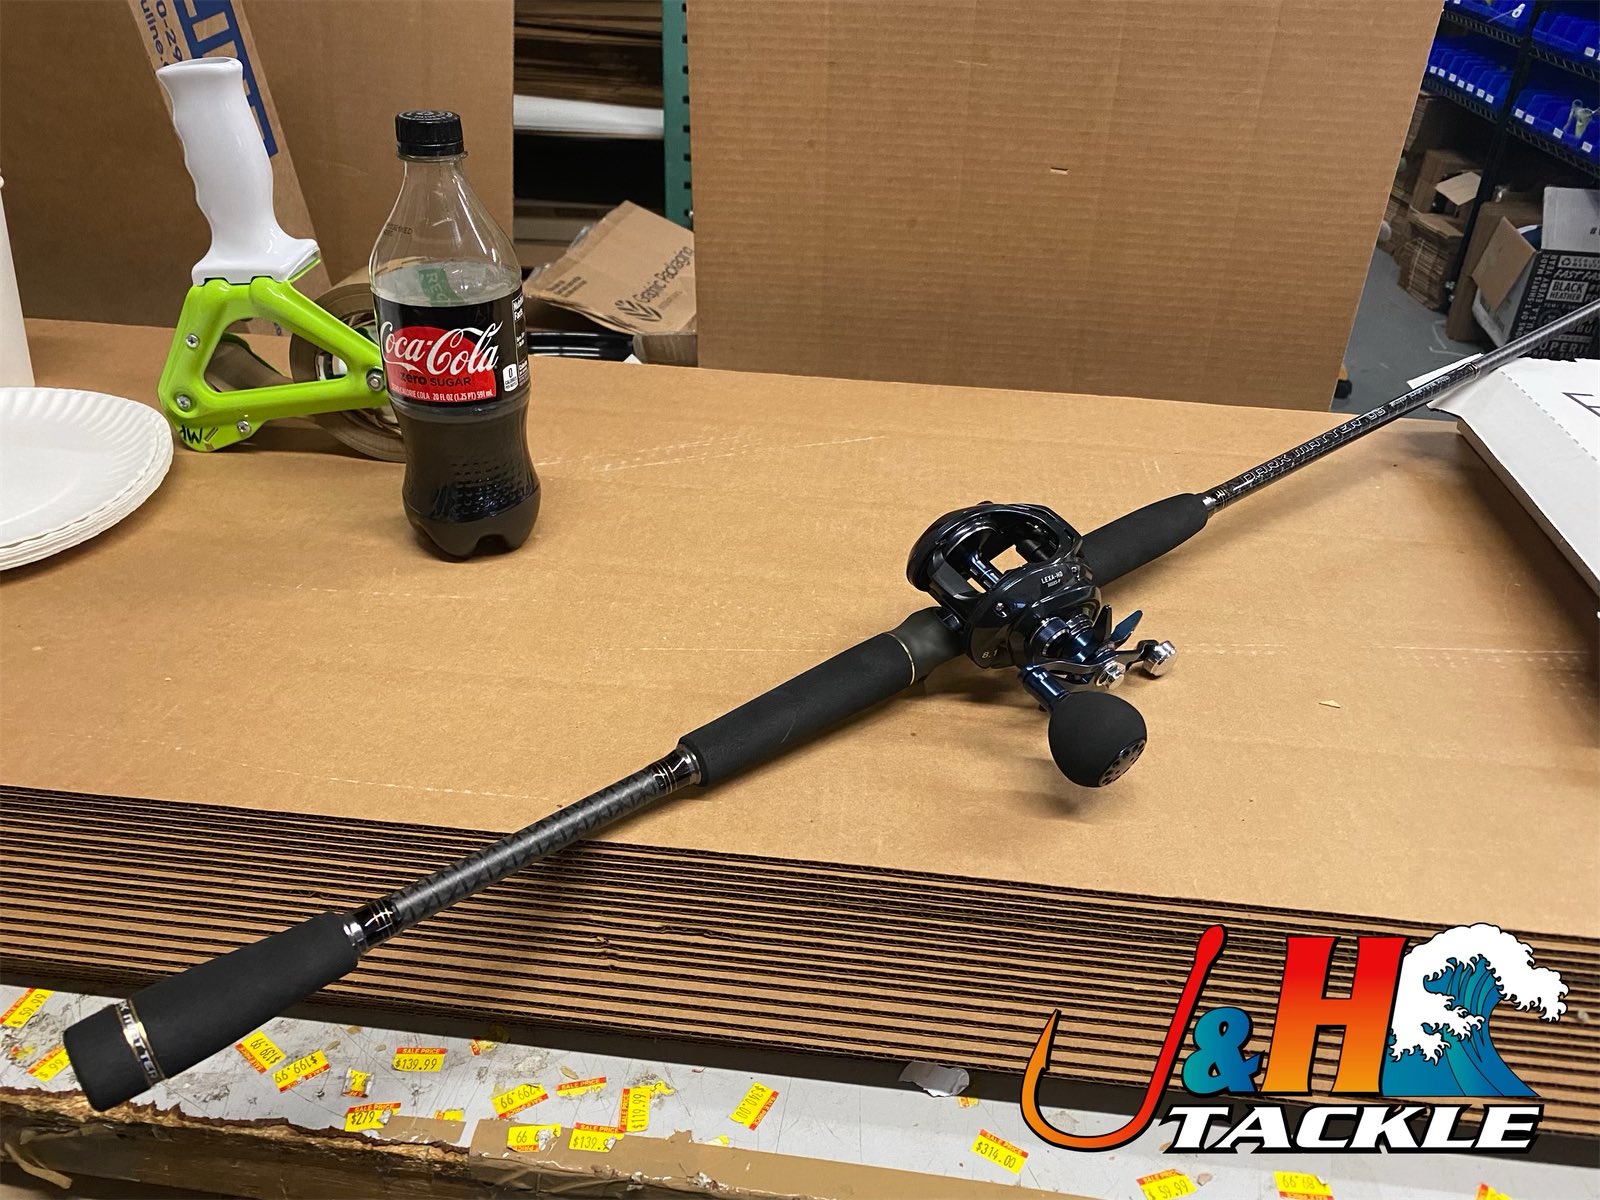 J&H Tackle on X: Here's a sneak peek at the Dark Matter OB Casting Surf Rod.  Also a shameless plug for Coke Zero. Rod should be available early summer.  #jandhtackle #fishing #darkmatterfishing #